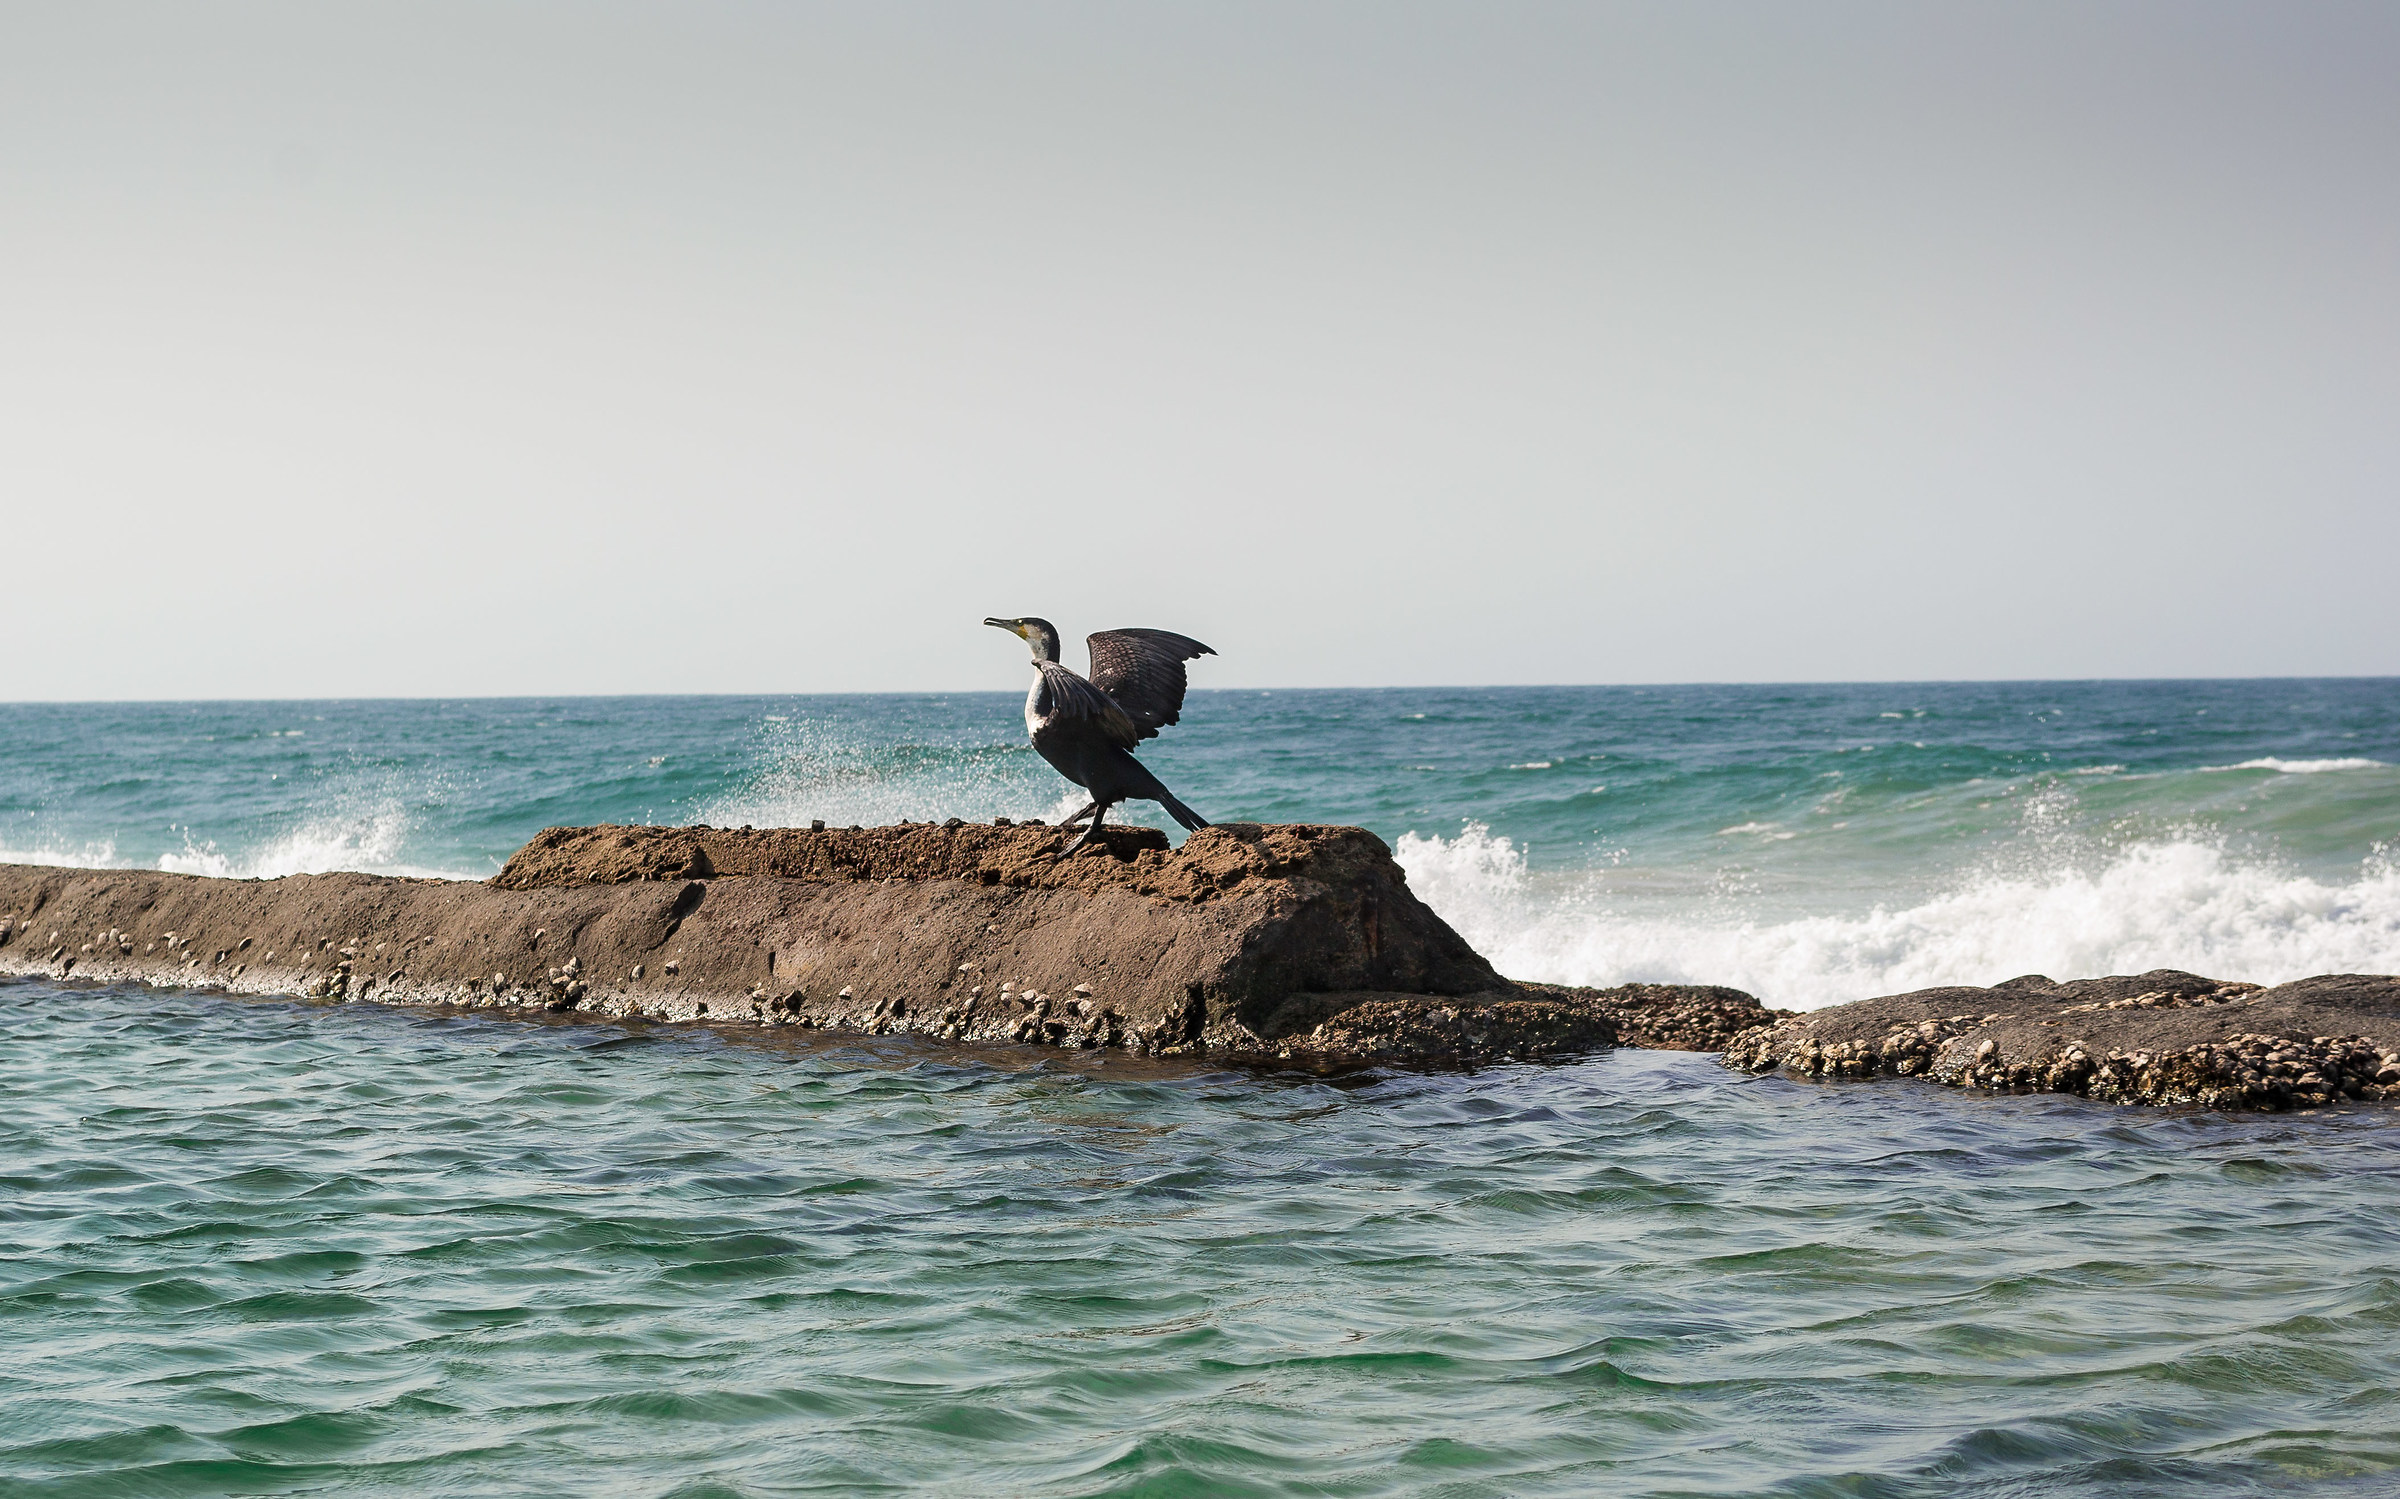 Cormorant in the waves-Ballito (South Africa)...